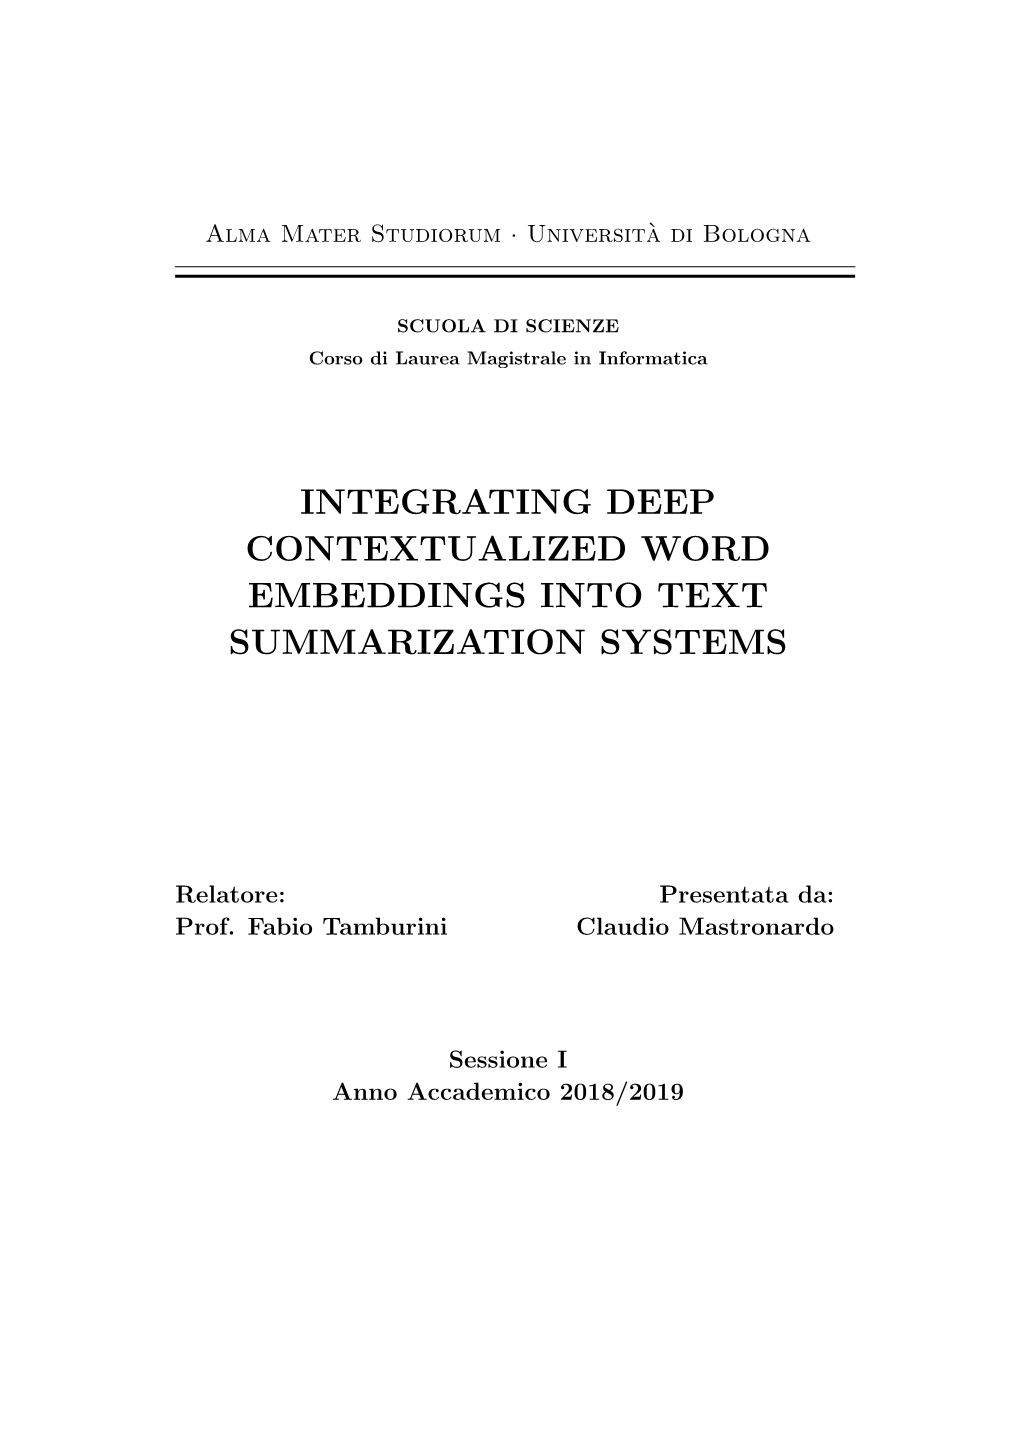 Integrating Deep Contextualized Word Embeddings Into Text Summarization Systems